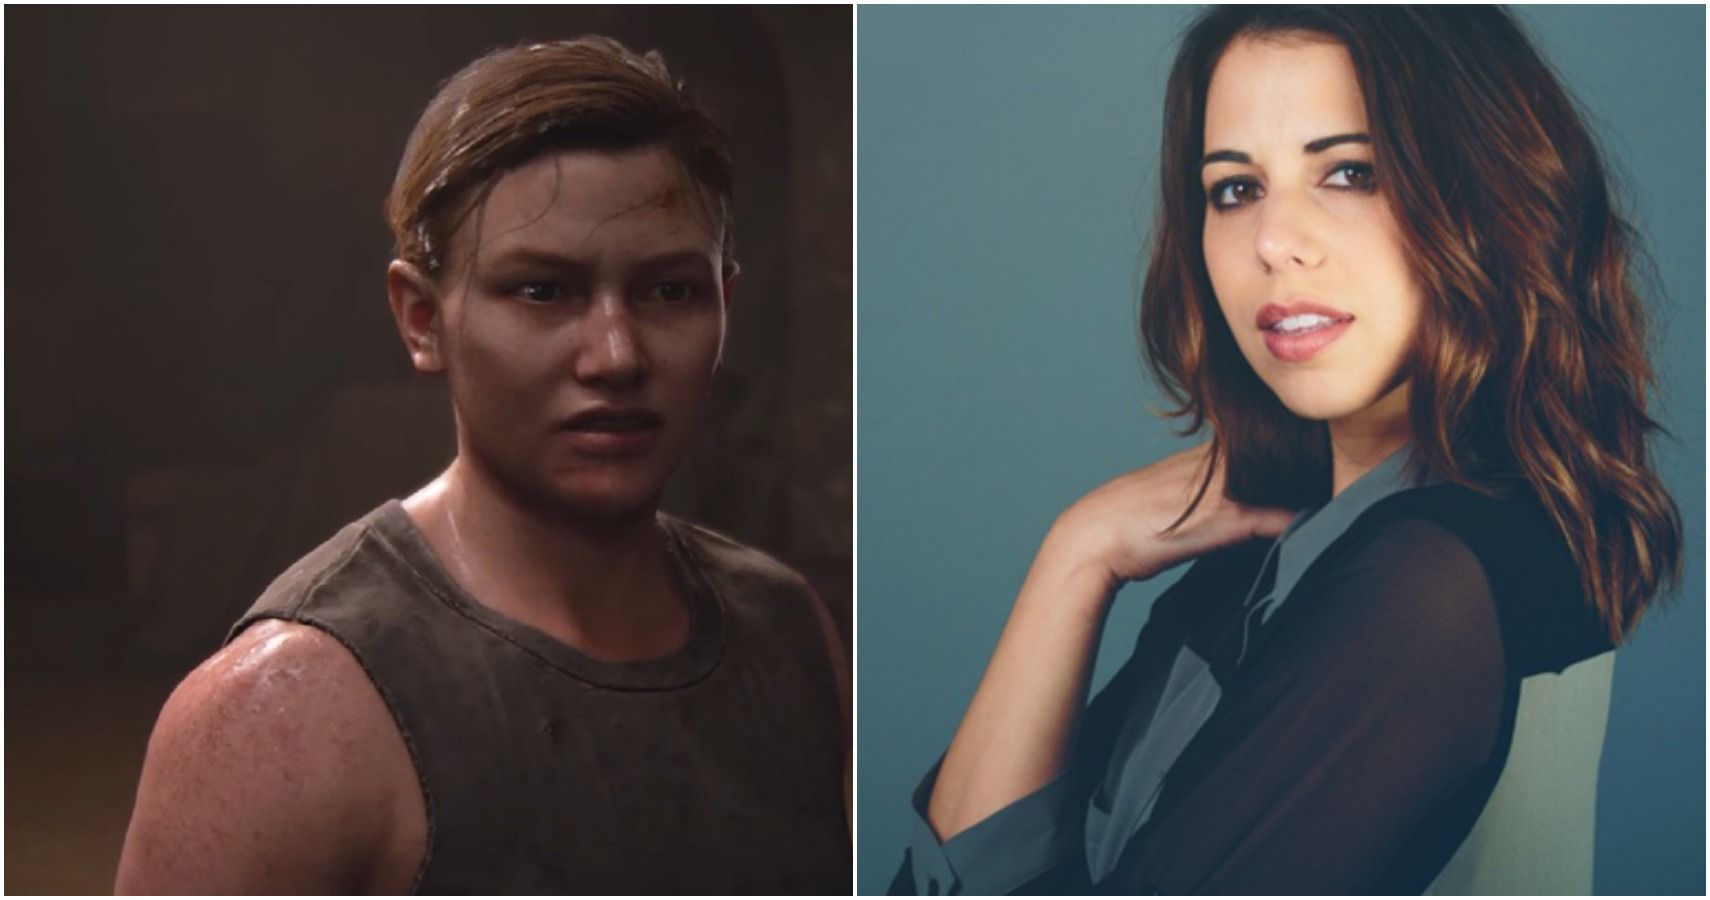 The Actress Who Plays Abby In The Last Of Us: Part 2 Is Gorgeous